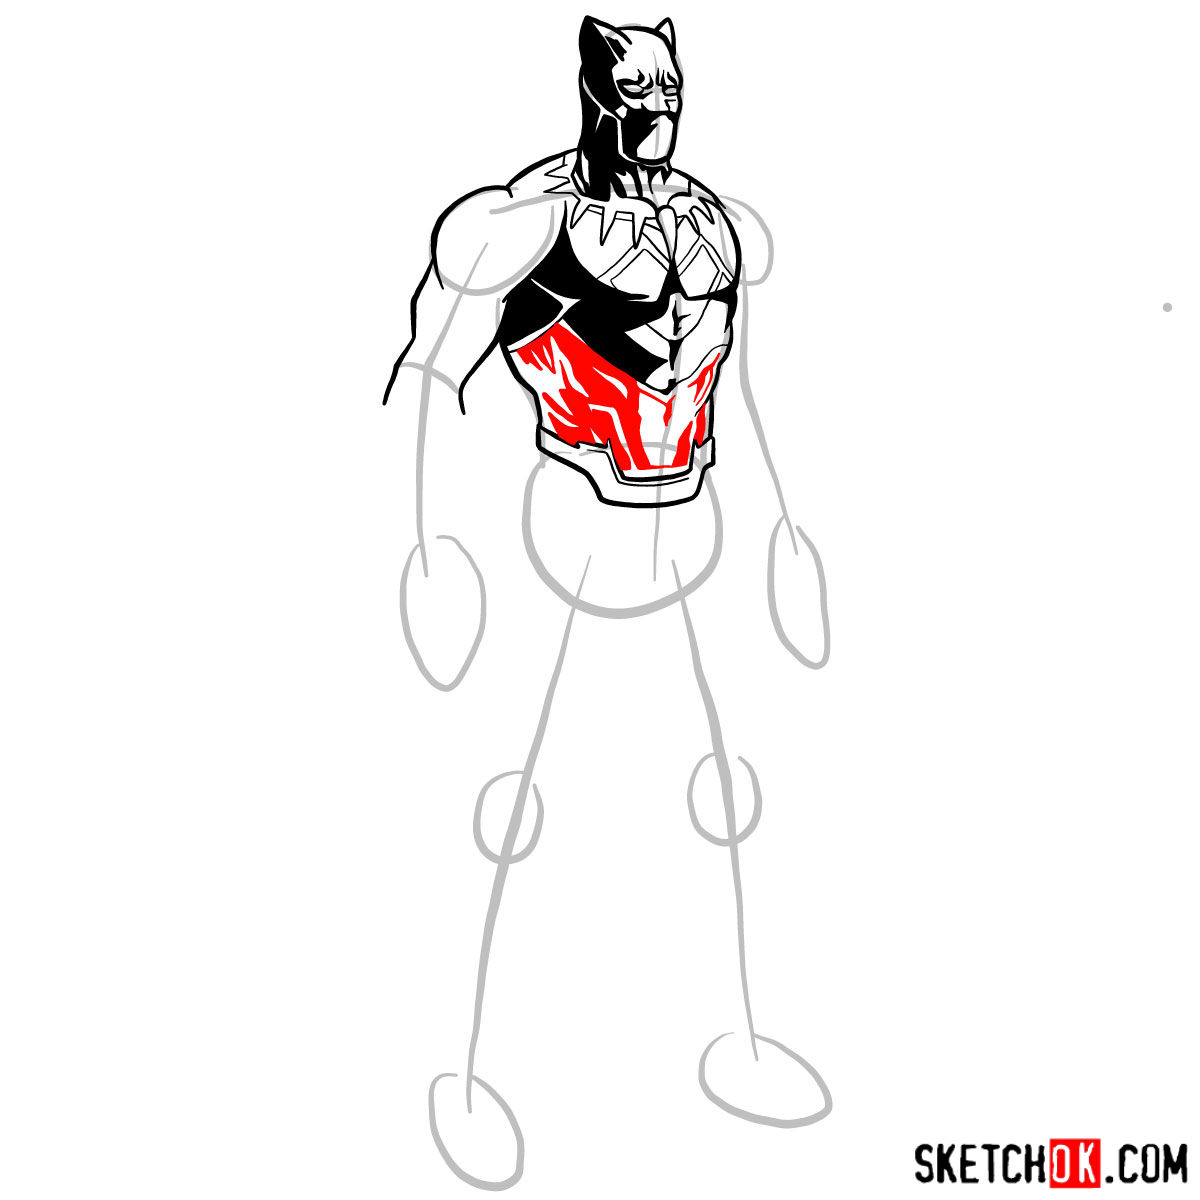 How to draw Black Panther from Marvel - step 08